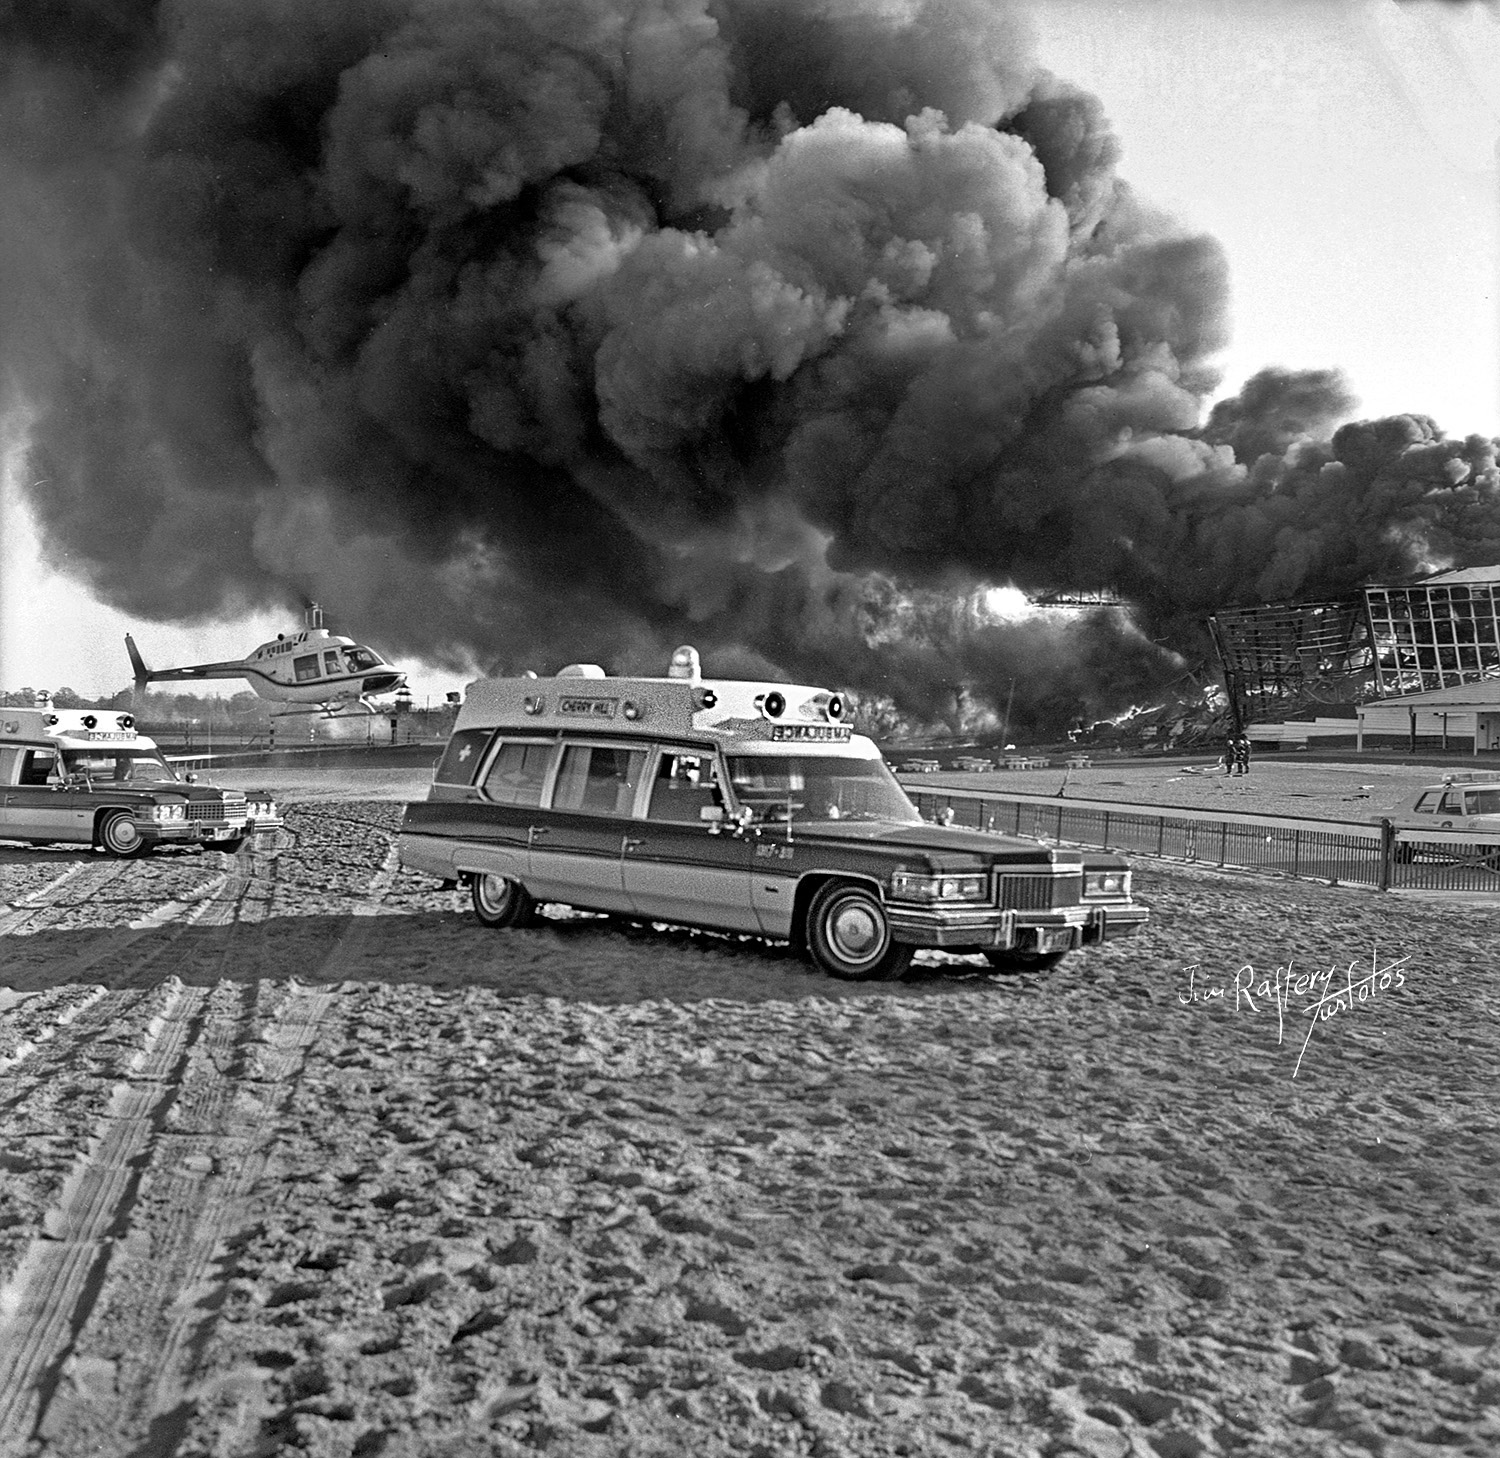 The famous Garden State Park fire, April 14, 1977 (Jim Raftery Turfotos)